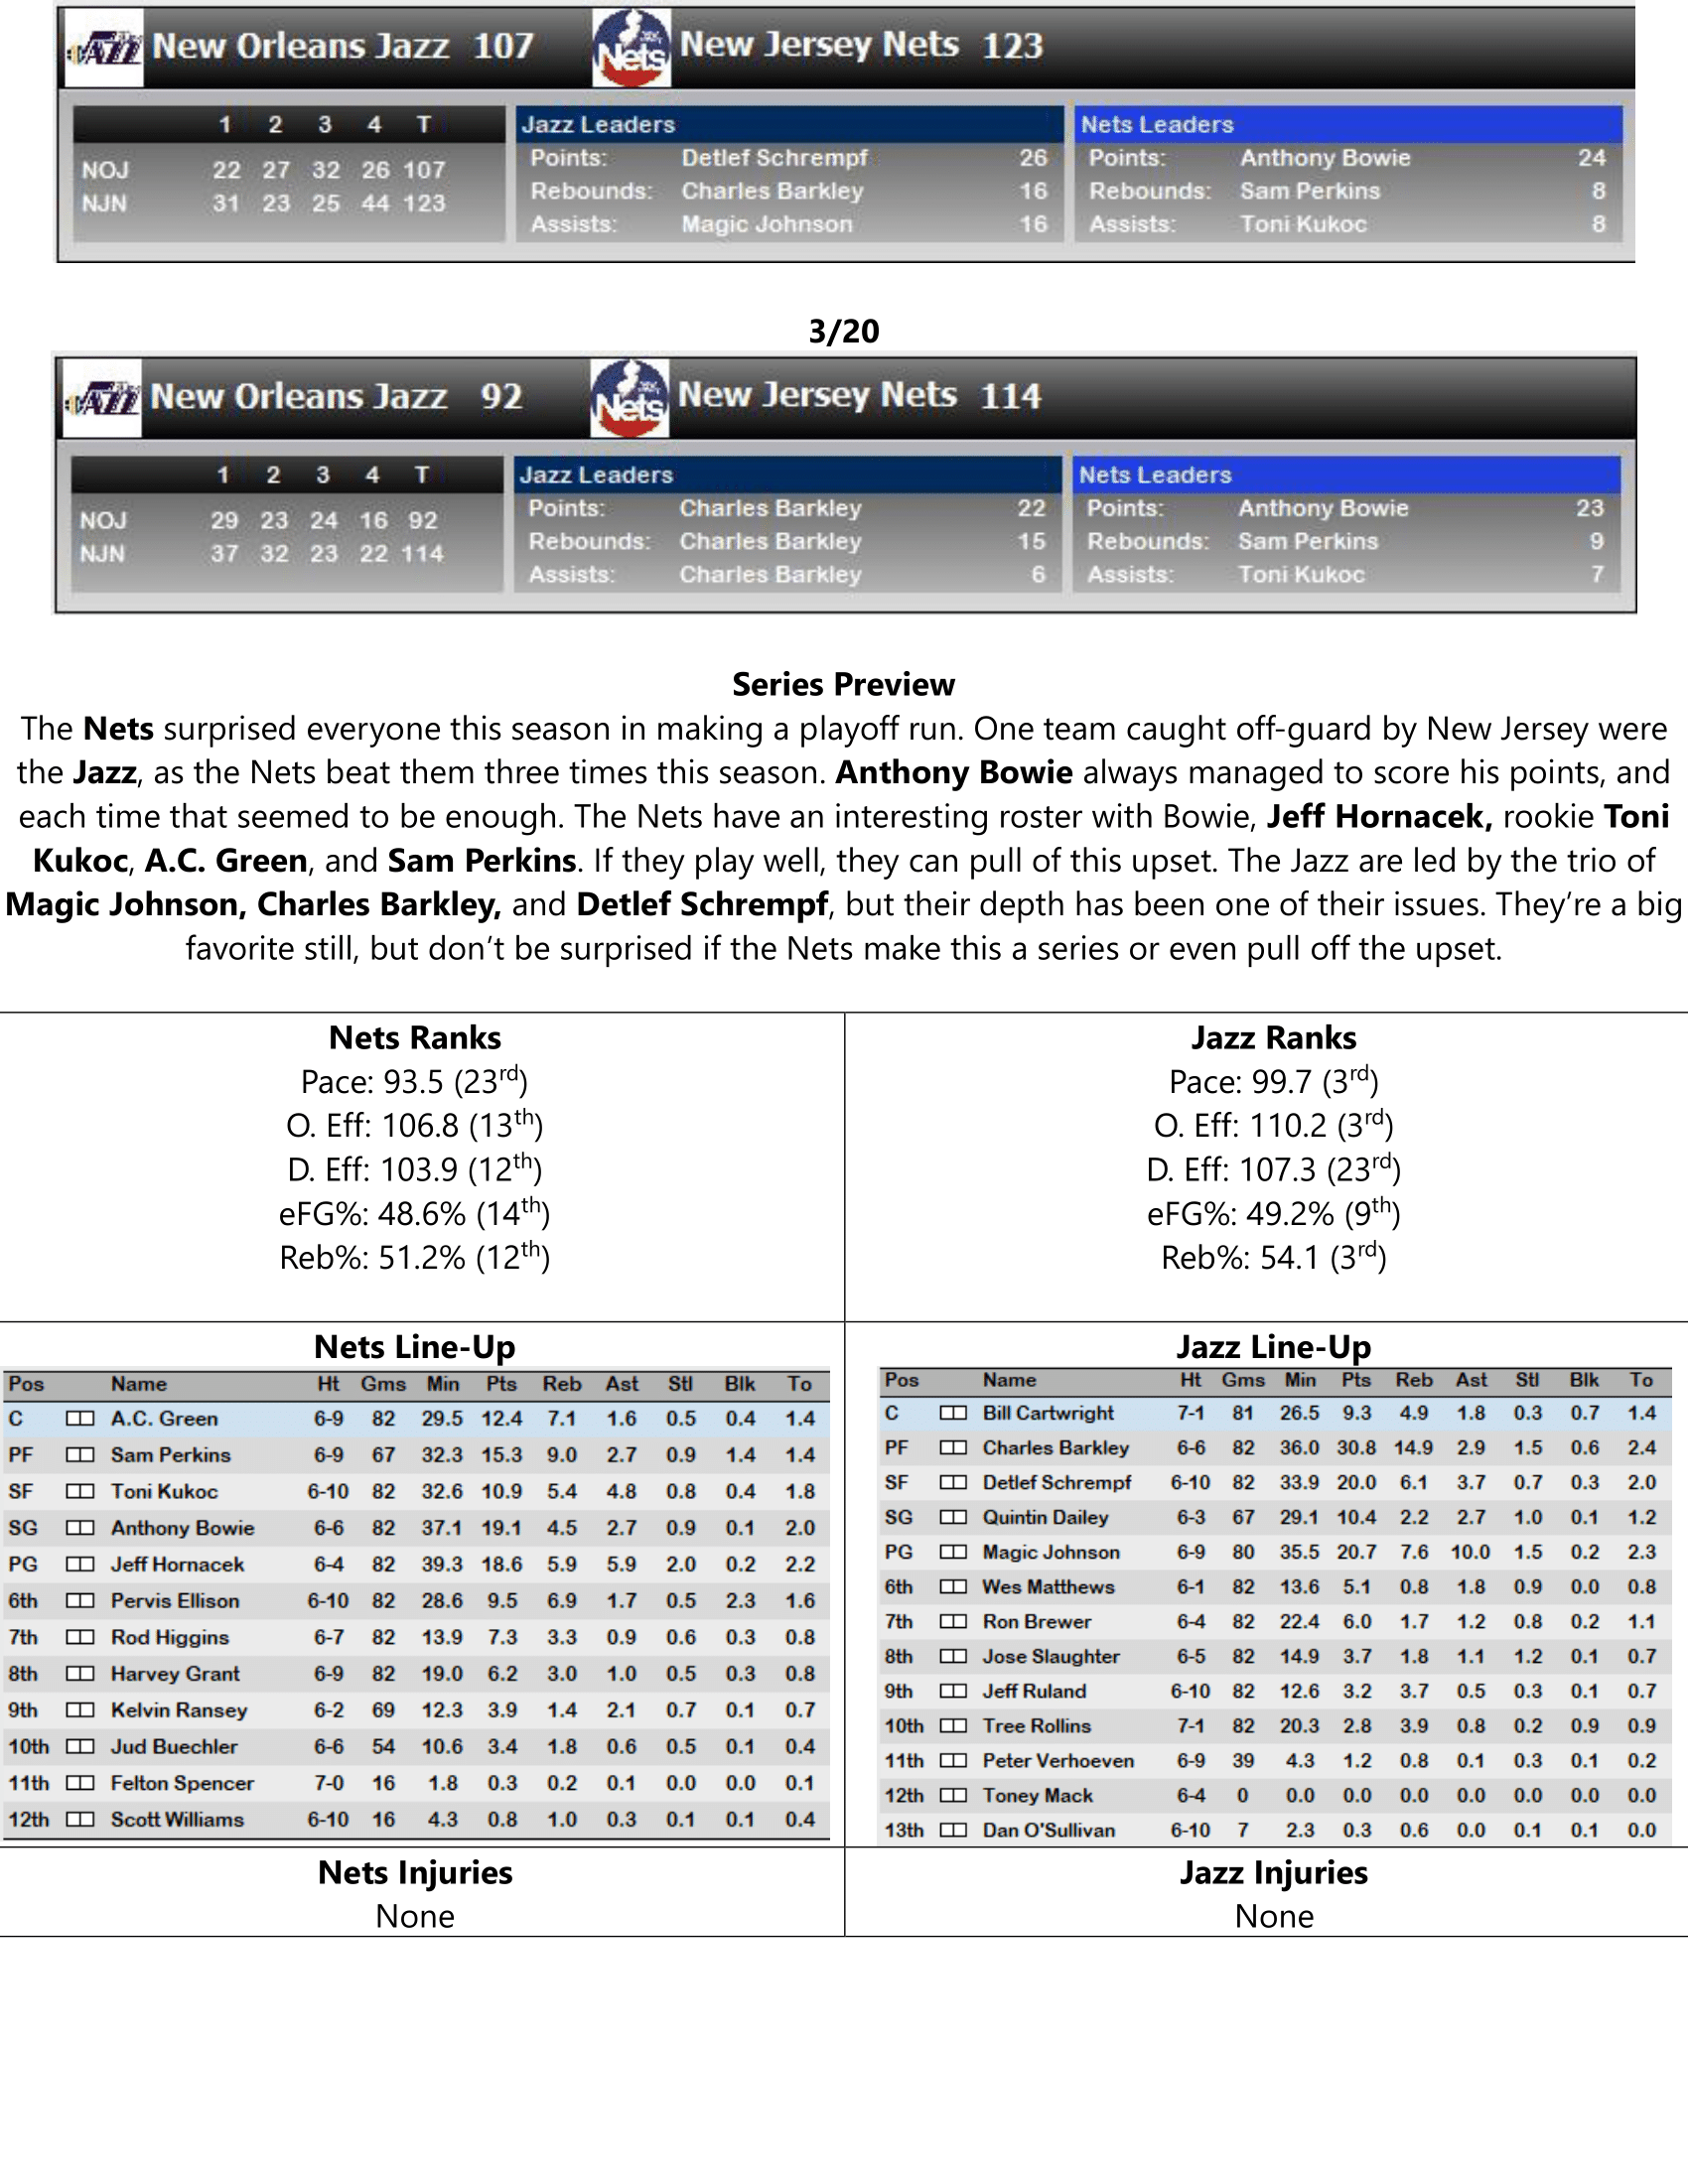 90-91-Part-4-Playoff-Preview-Round-1-11.png